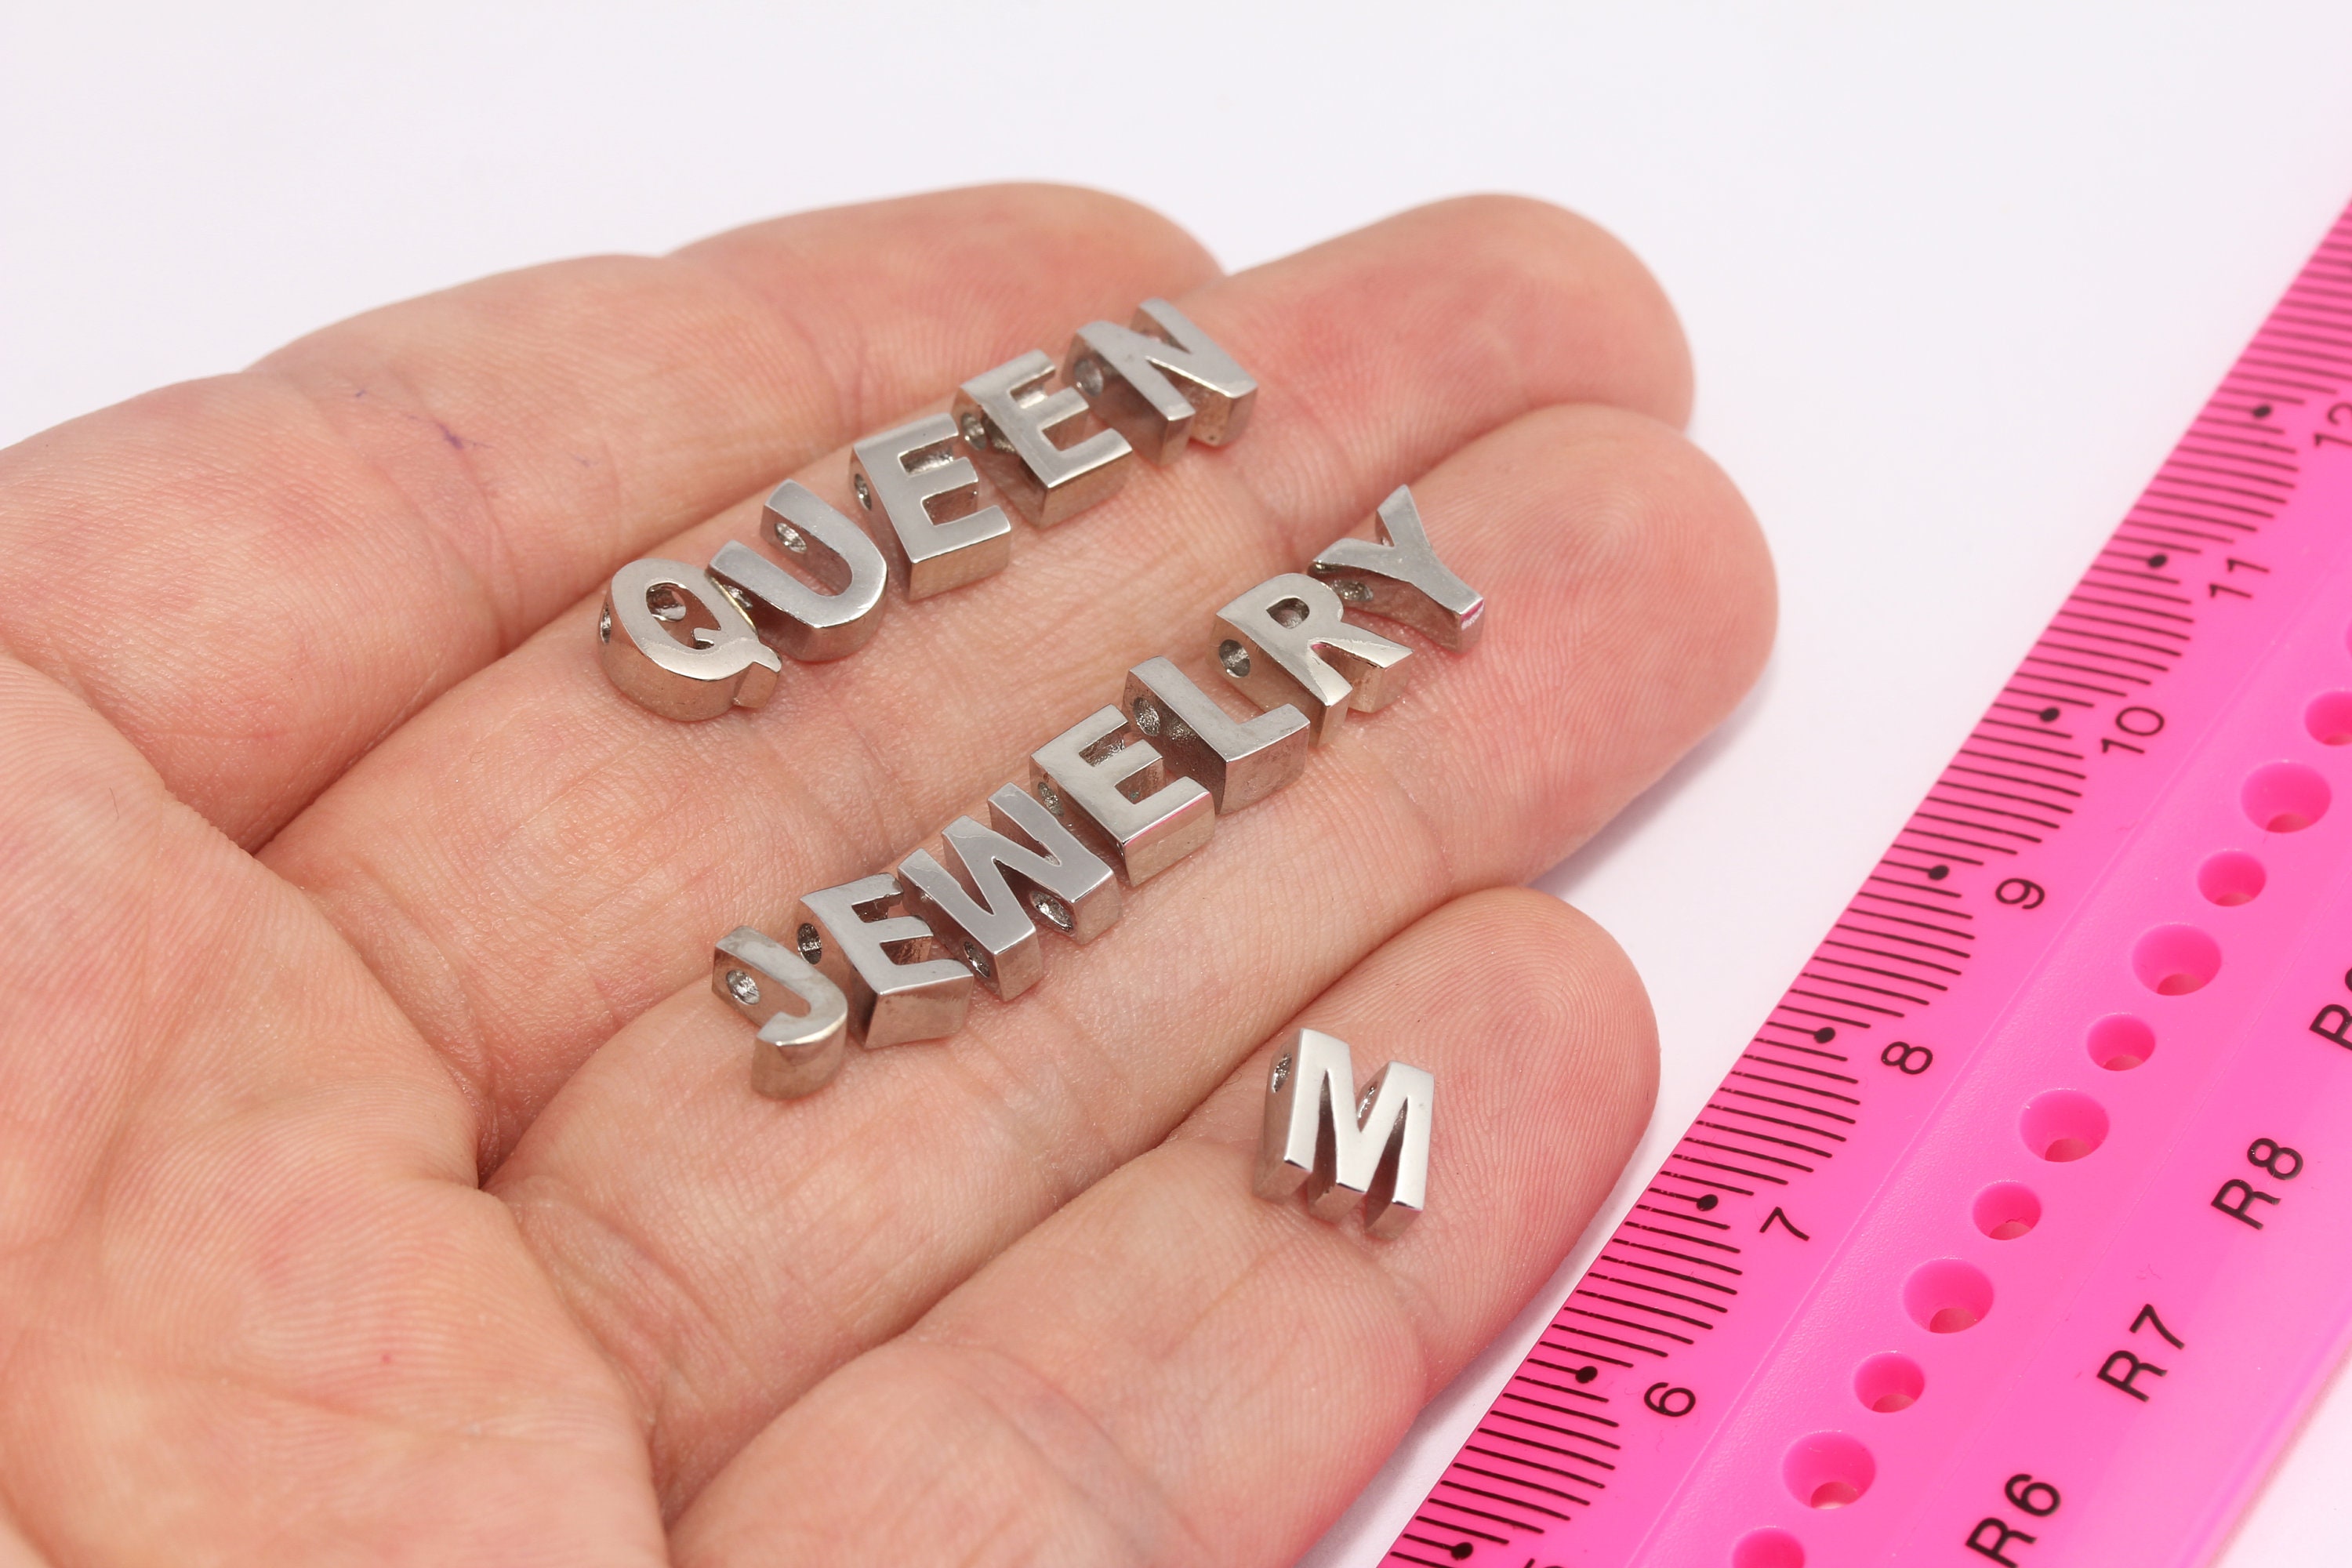 Shop DICOSMETIC 288pcs 36 Styles 304 Stainless Steel Alphabet Charms Letter  A-Z Pendants Number 0-9 Charms Initial Letter Charms Small Hole Charms for Jewelry  Making for Jewelry Making - PandaHall Selected